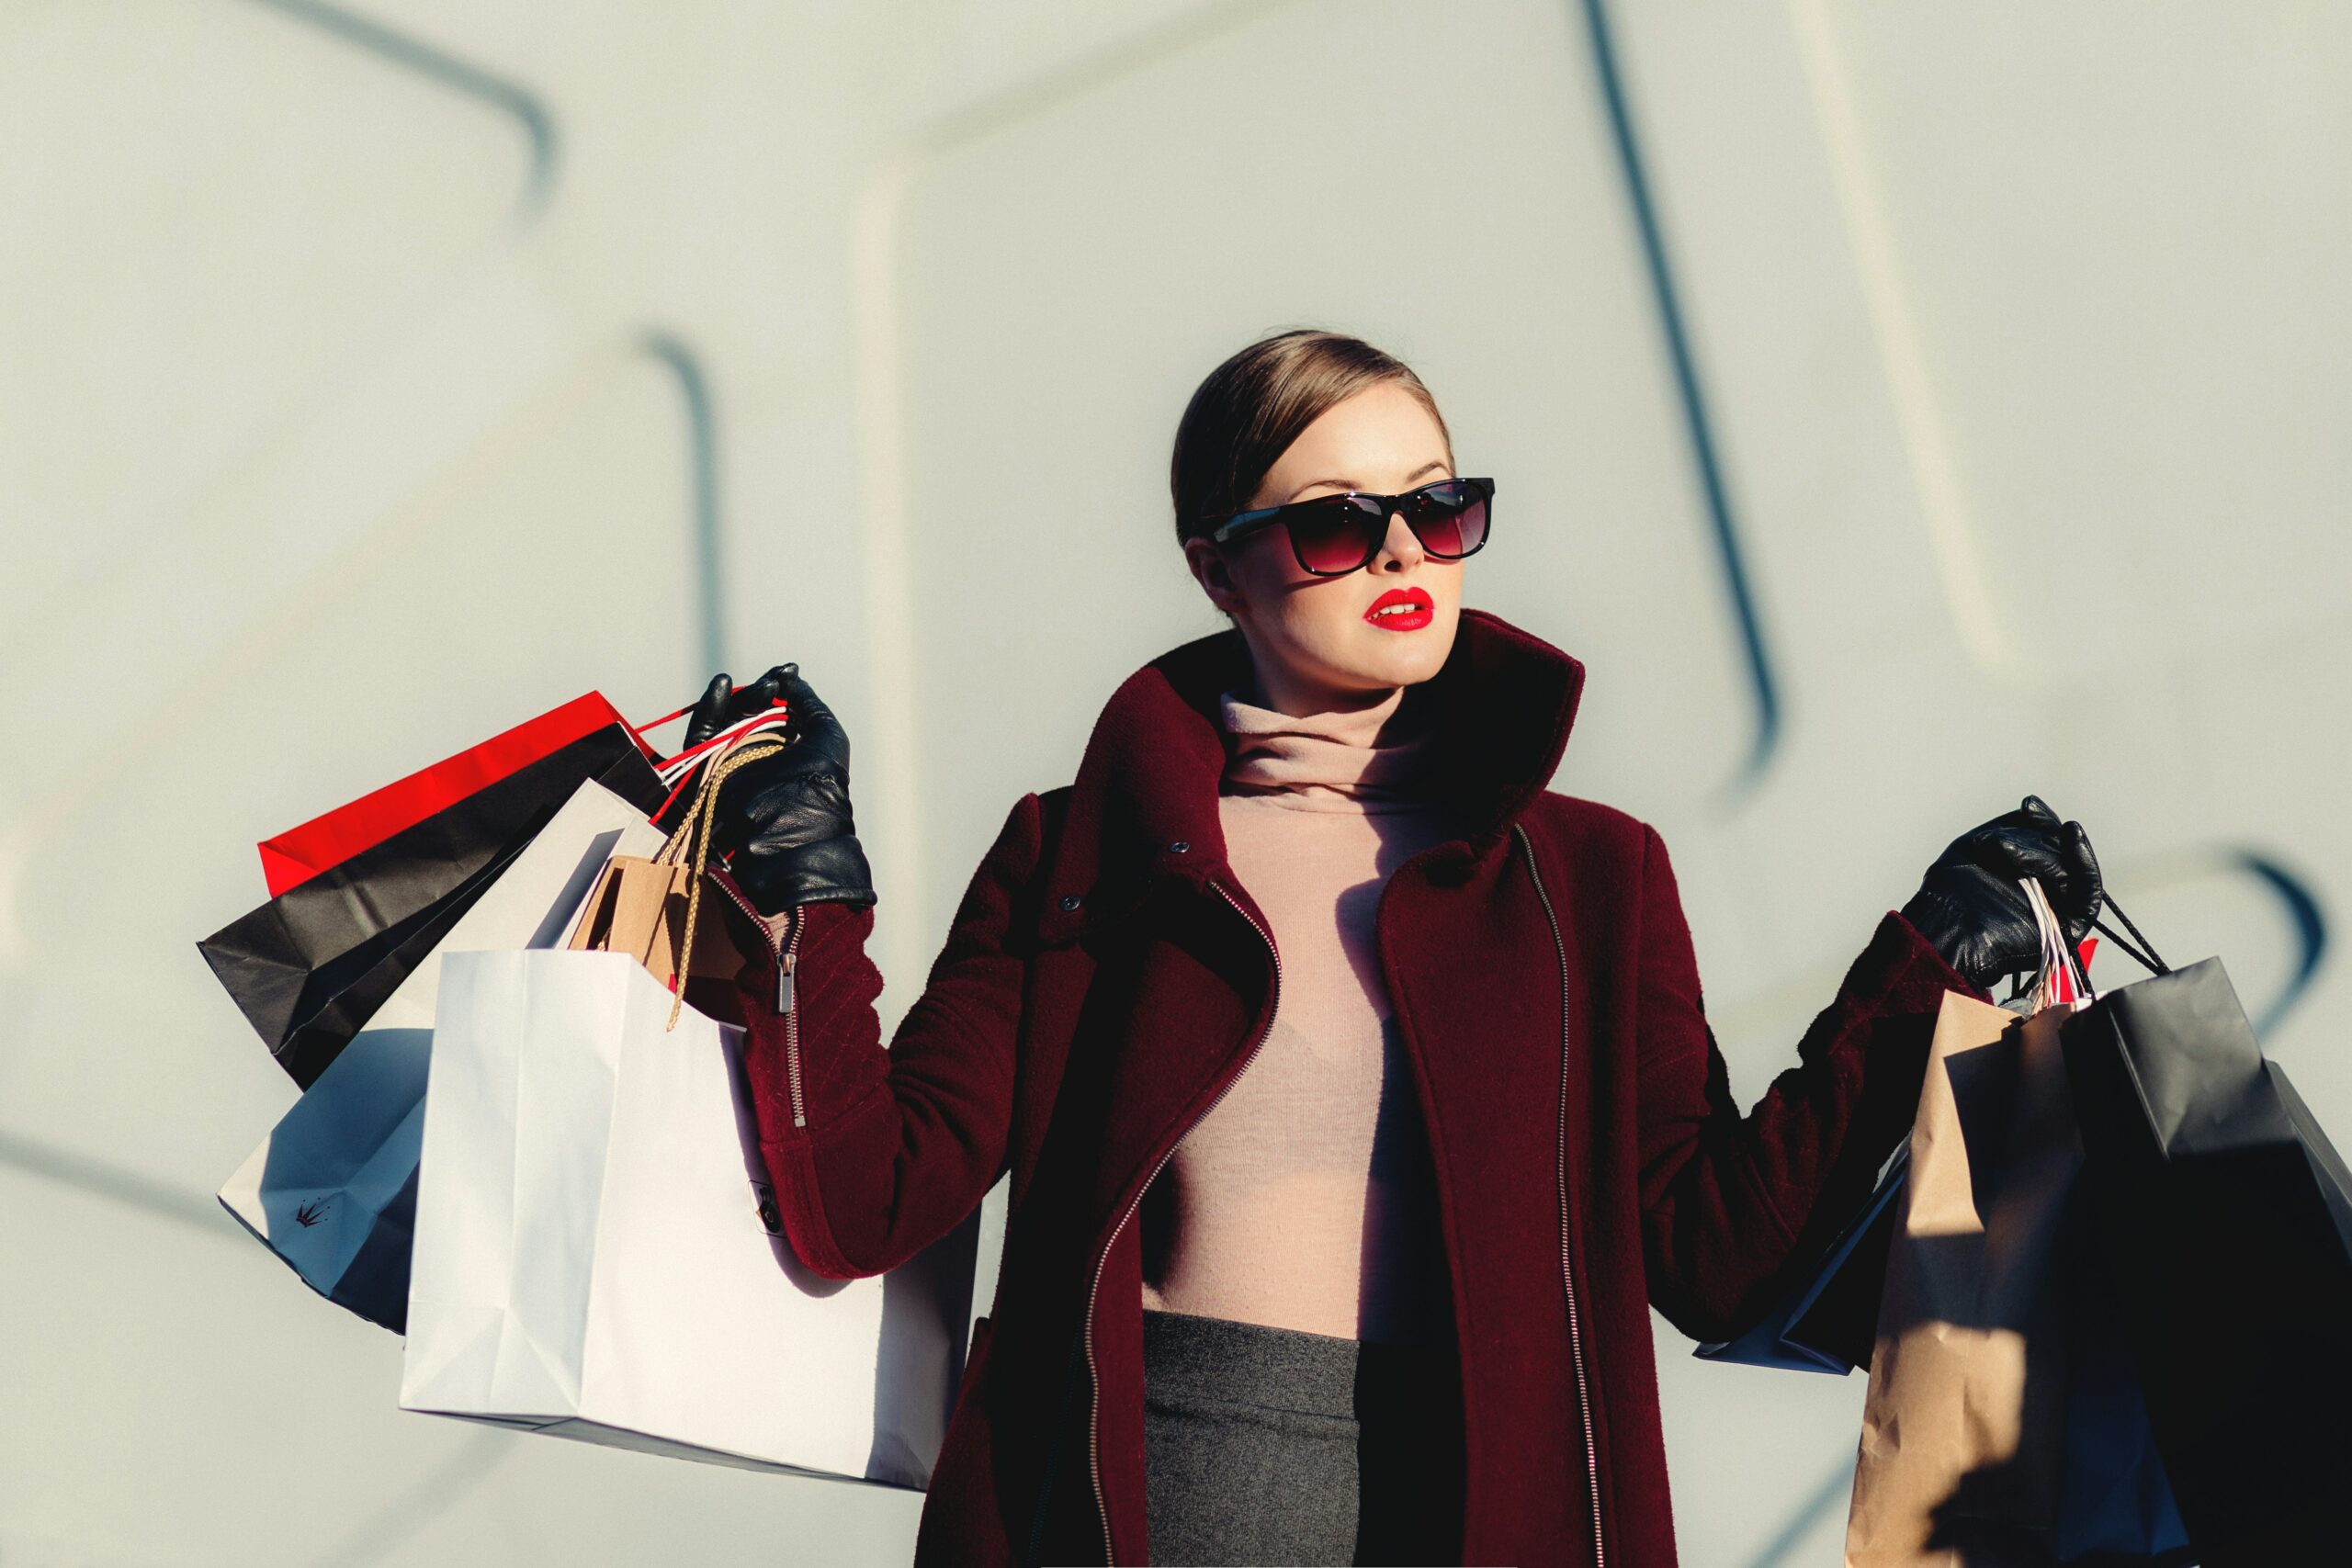 A fashionable woman wearing sunglasses is holding shopping bags outside of a mall.